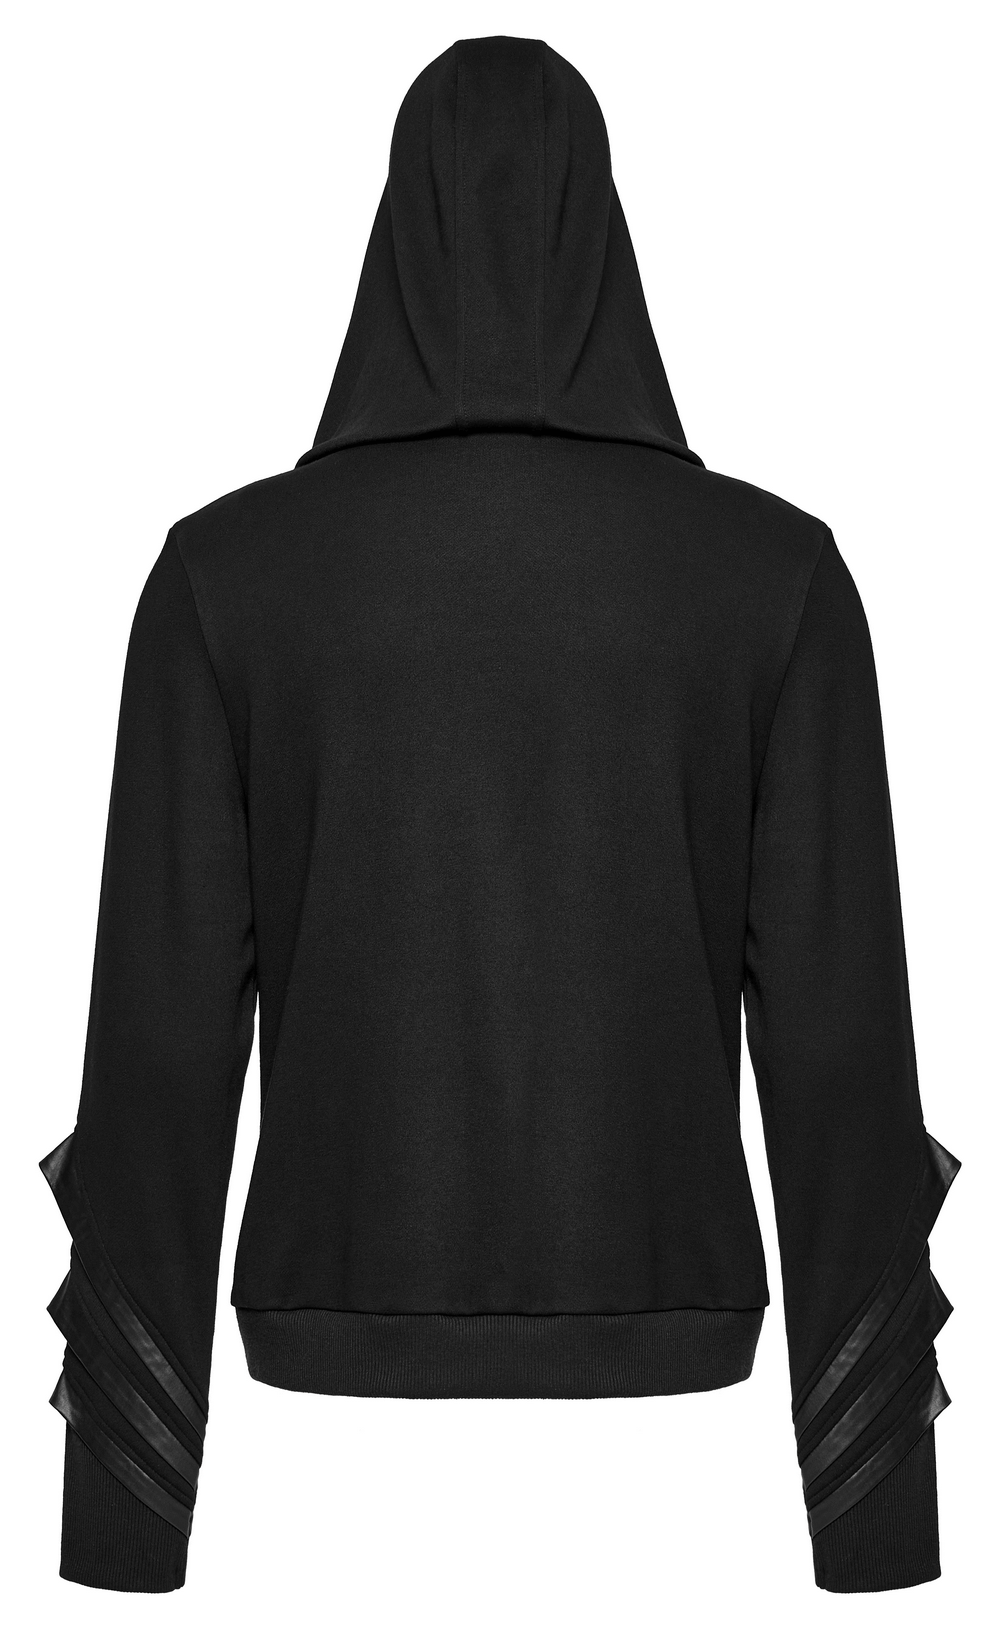 Edgy Punk Hoodie with PU Leather Details for Men